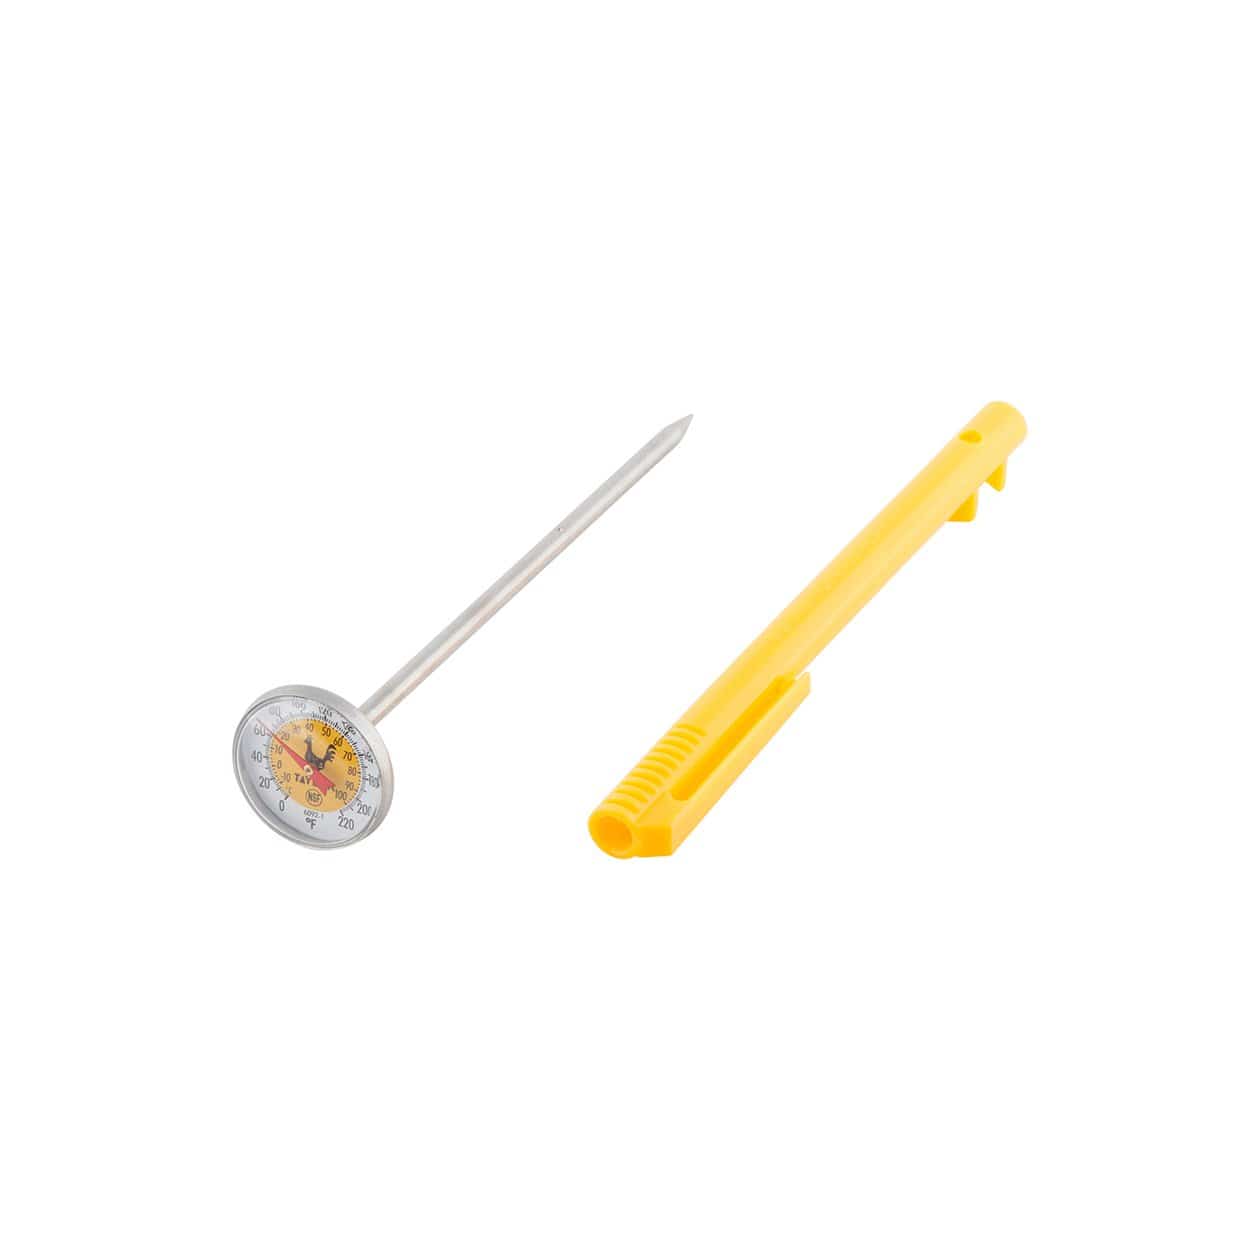 TAYLOR 559 C Candy Thermometer Instant Read Analog